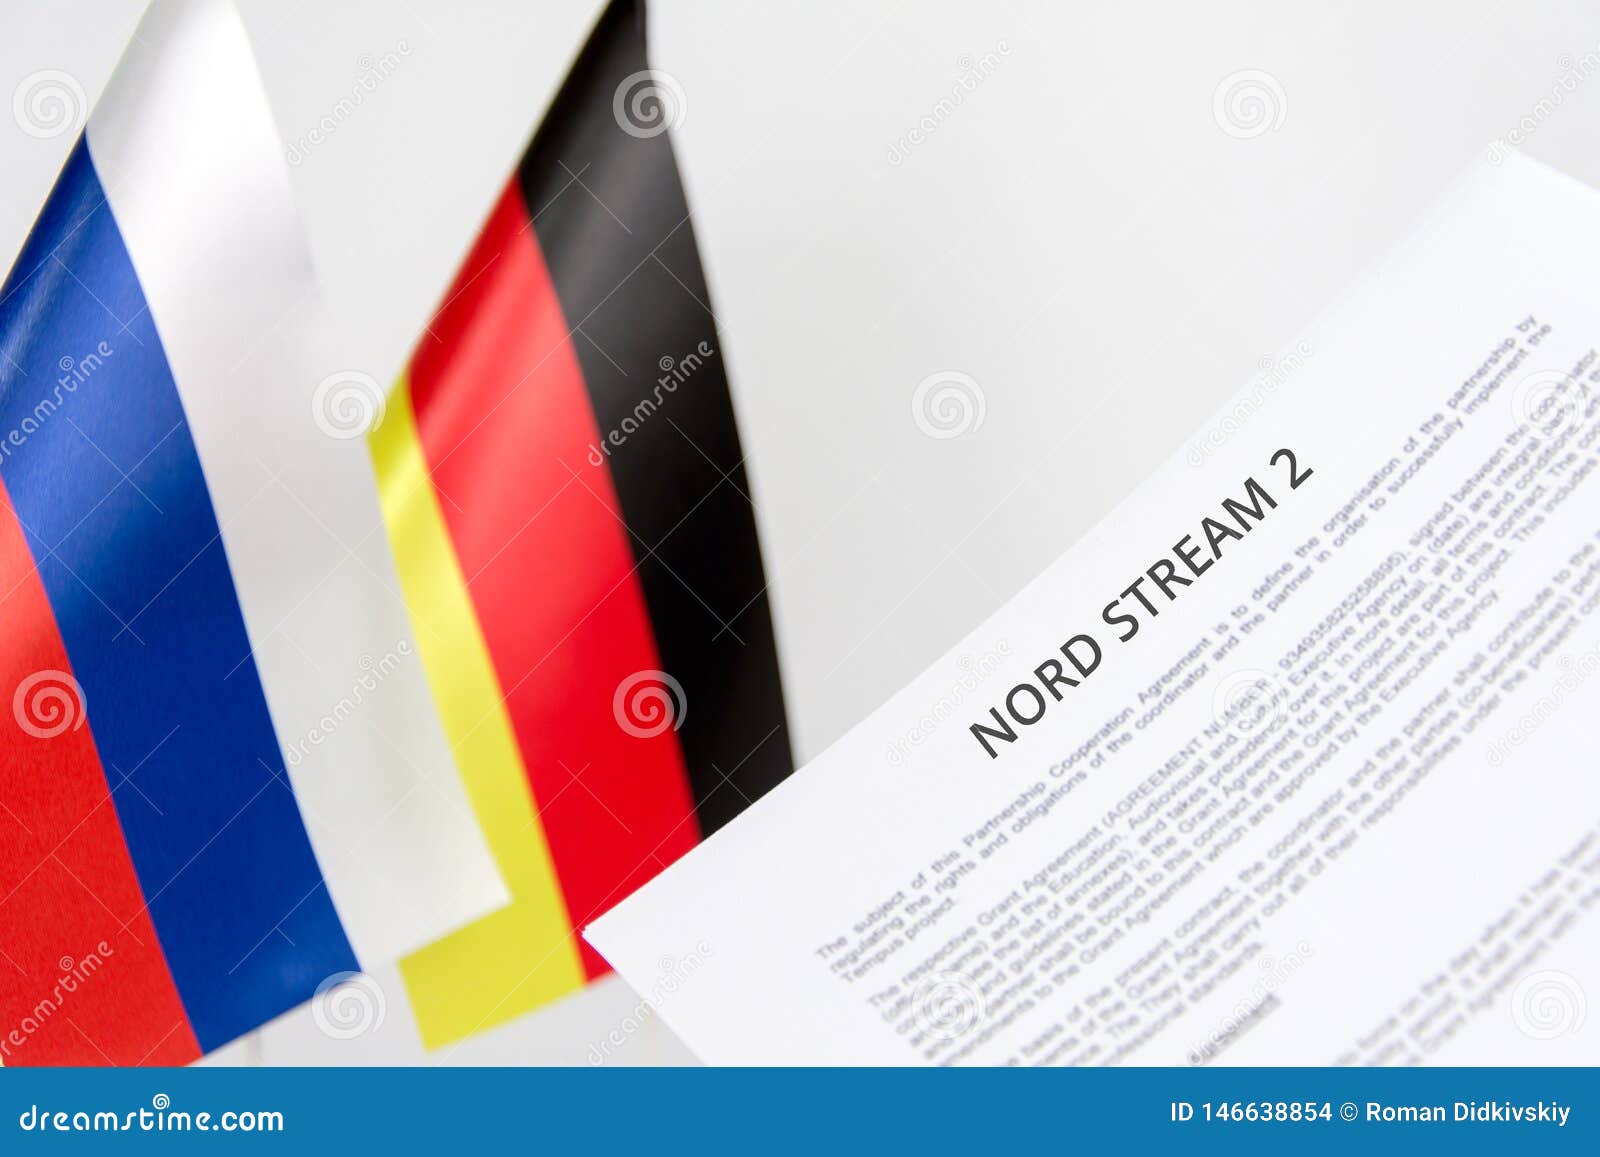 russia germany flag nord stream